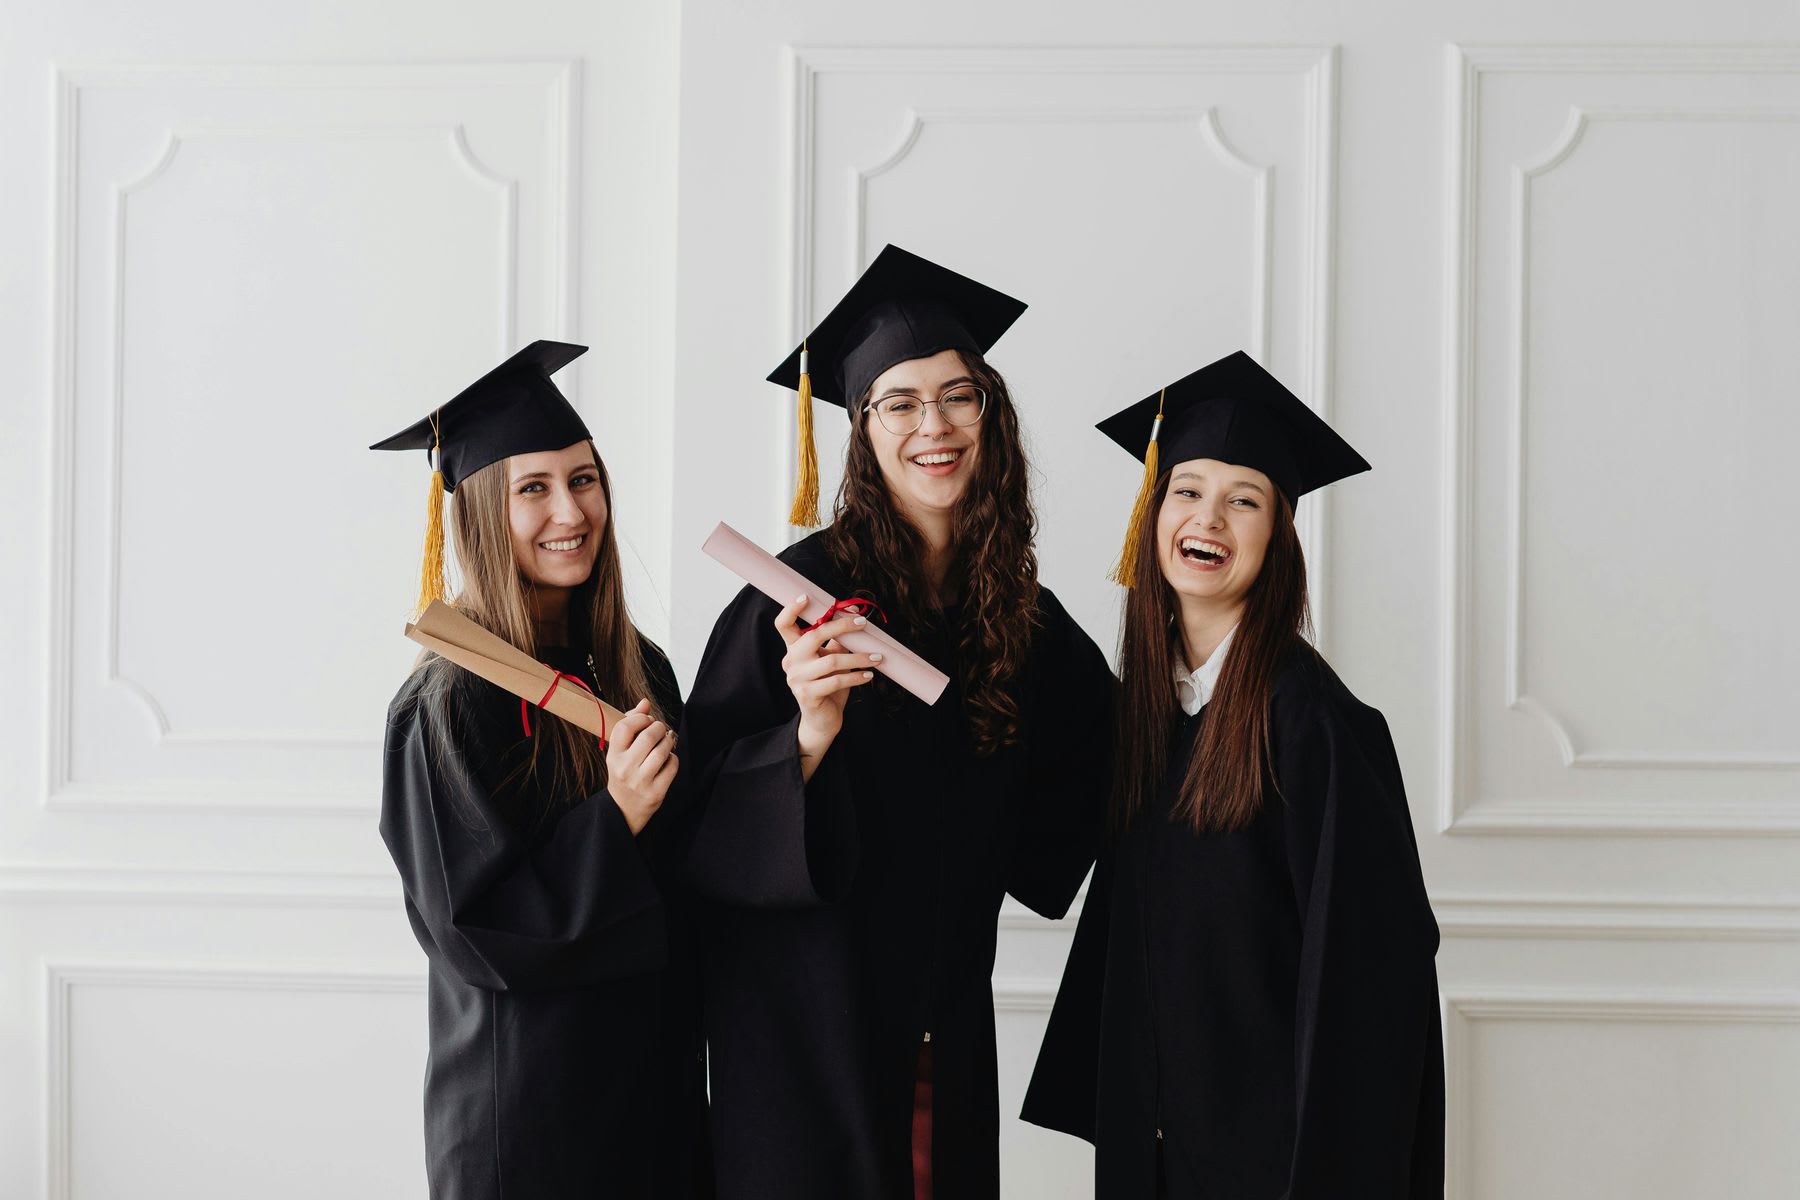 Three women wearing graduation caps and robes posing for their photos